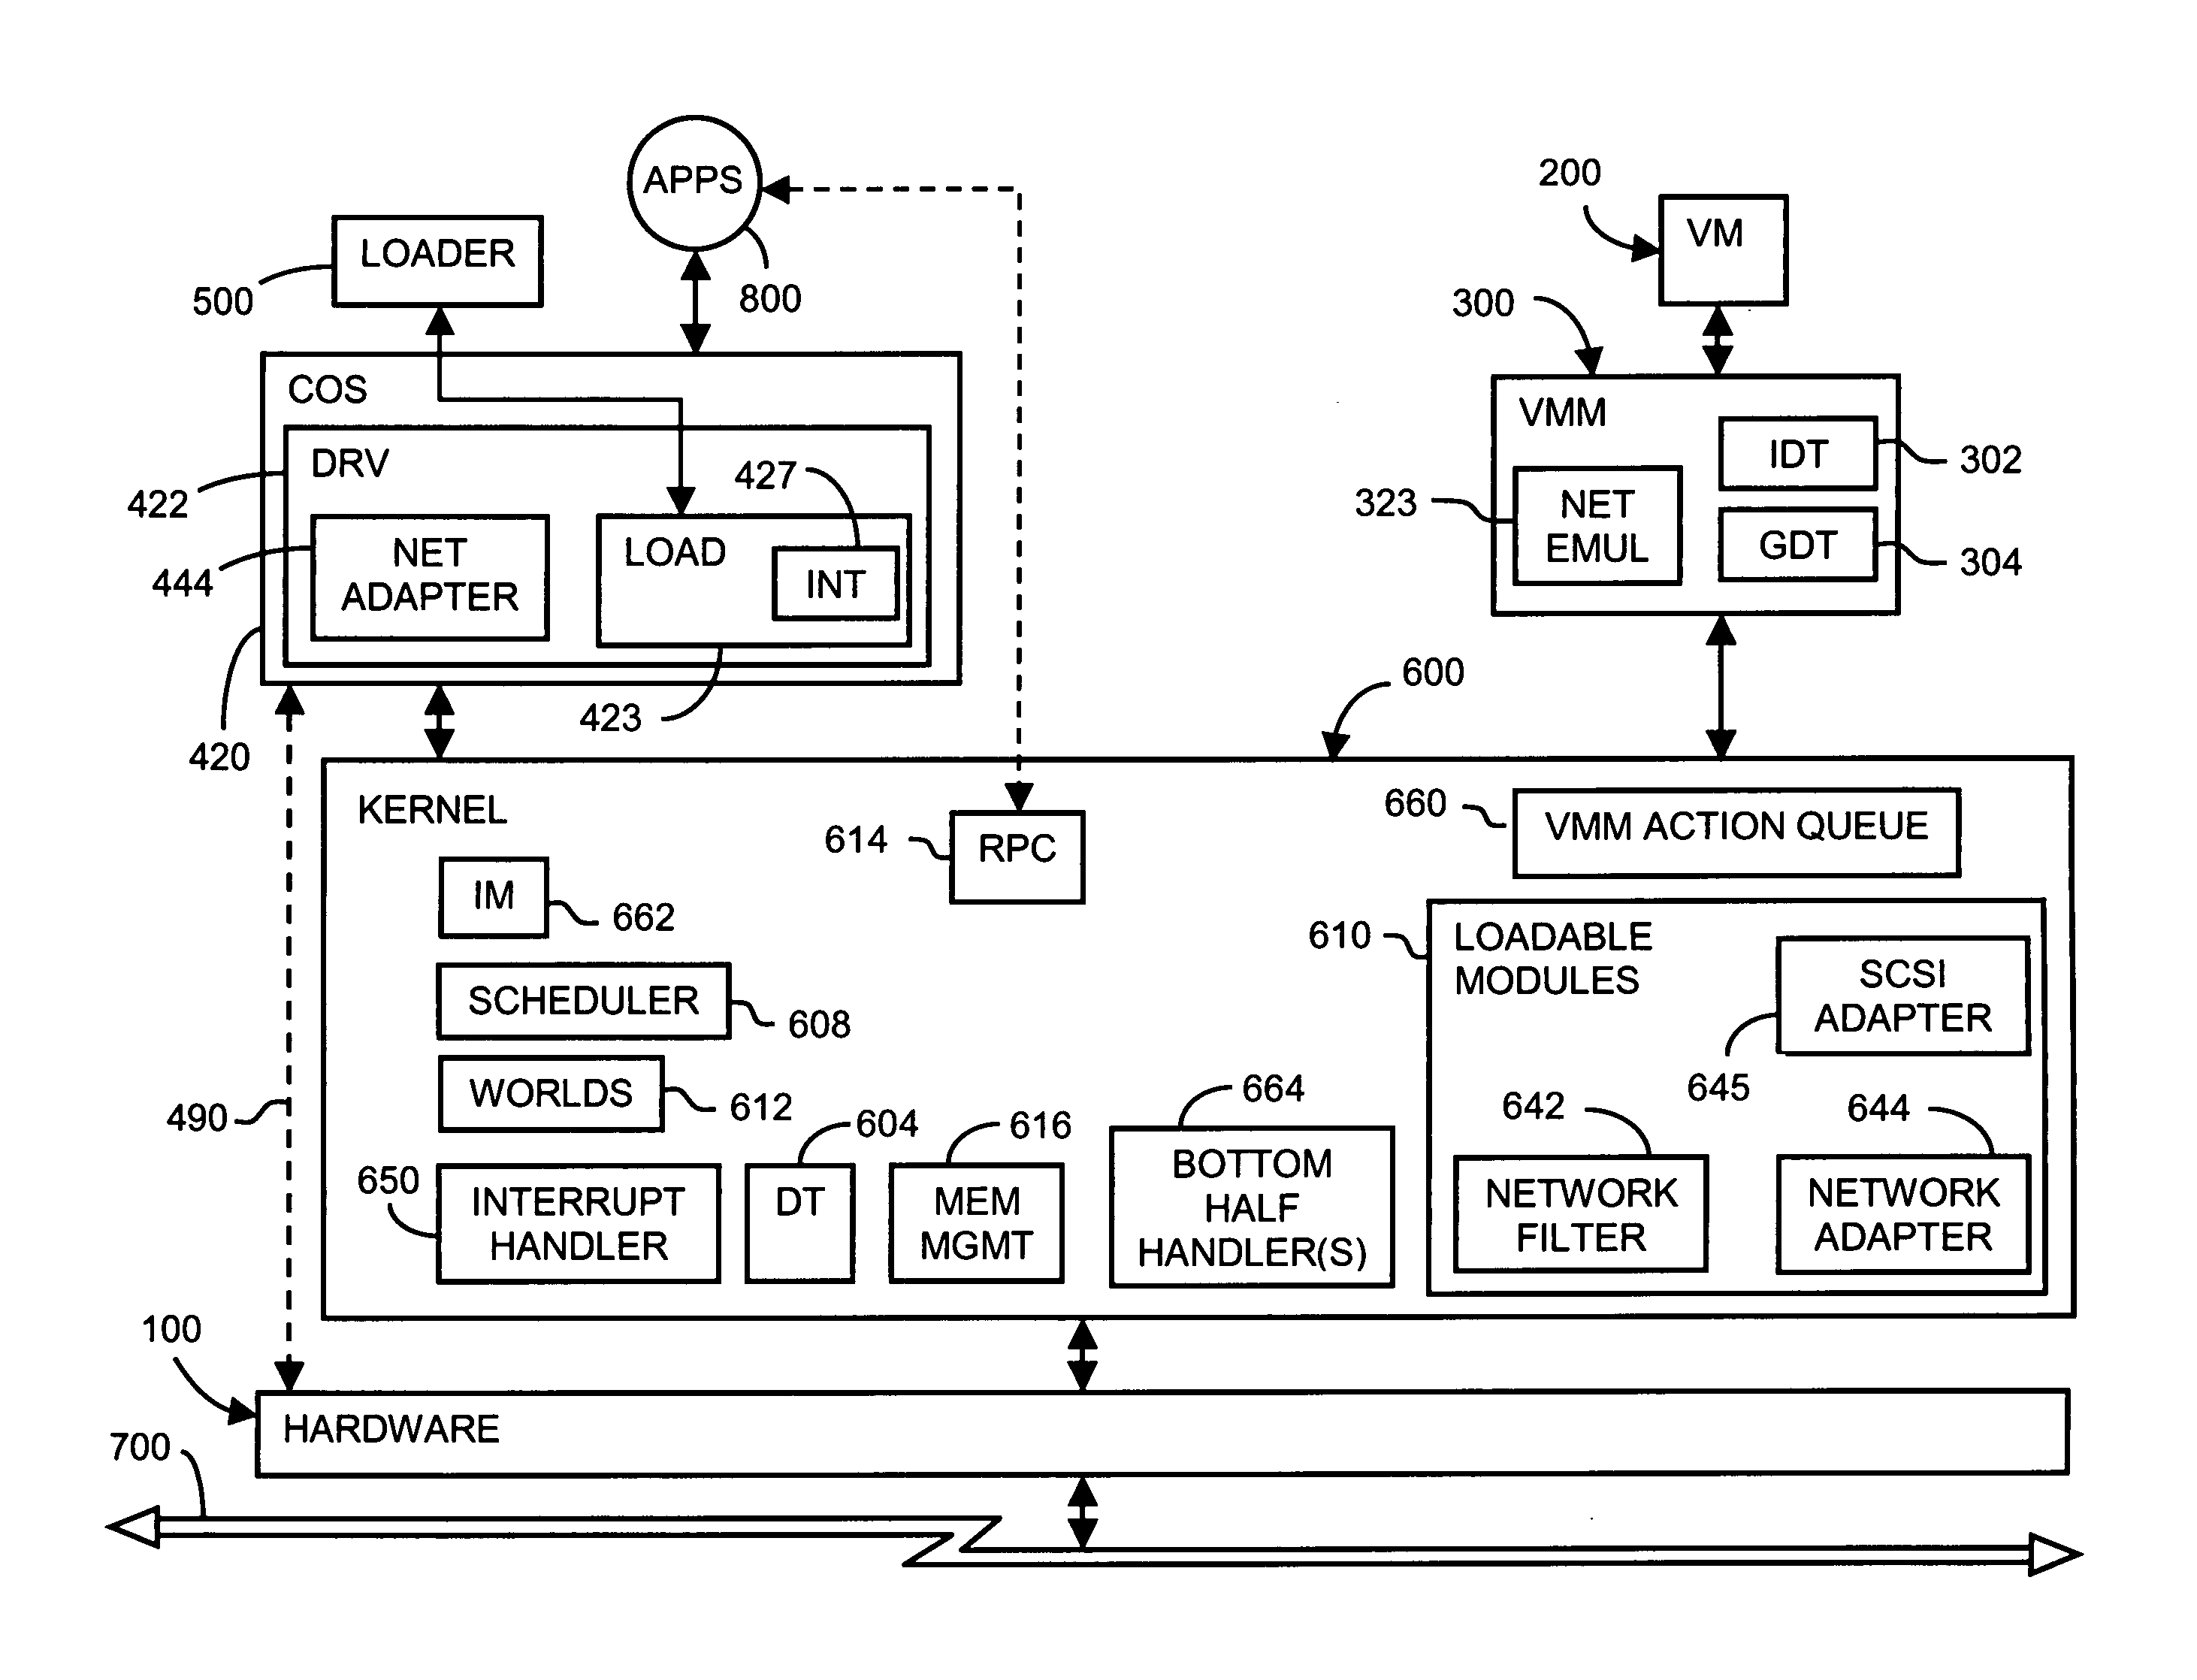 System software displacement in a virtual computer system